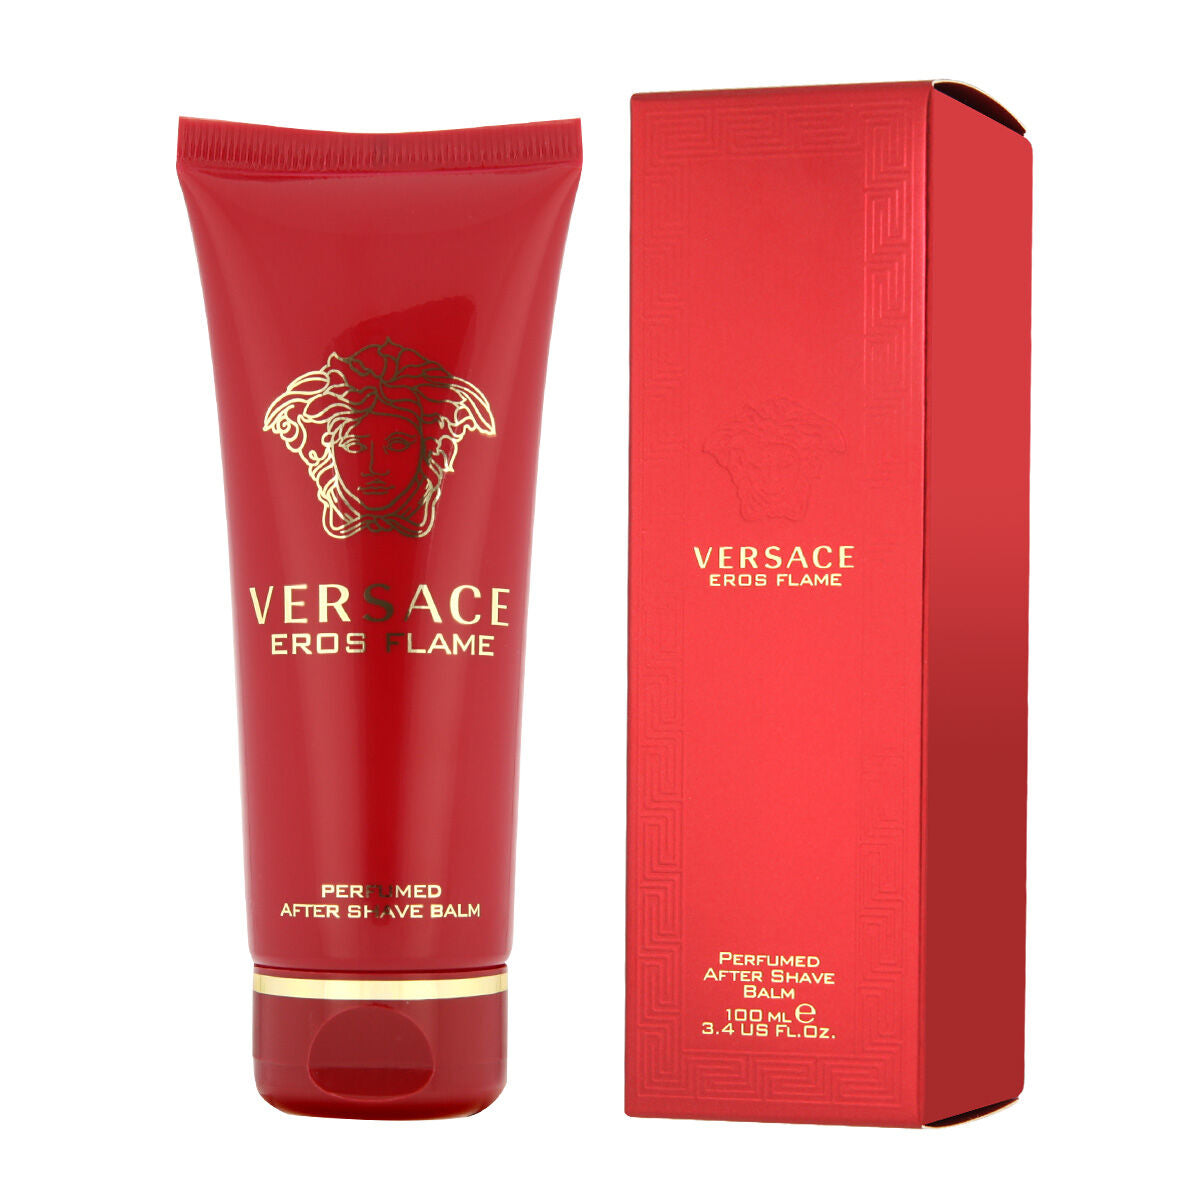 After Shave Balm Versace 100 ml Eros Flame